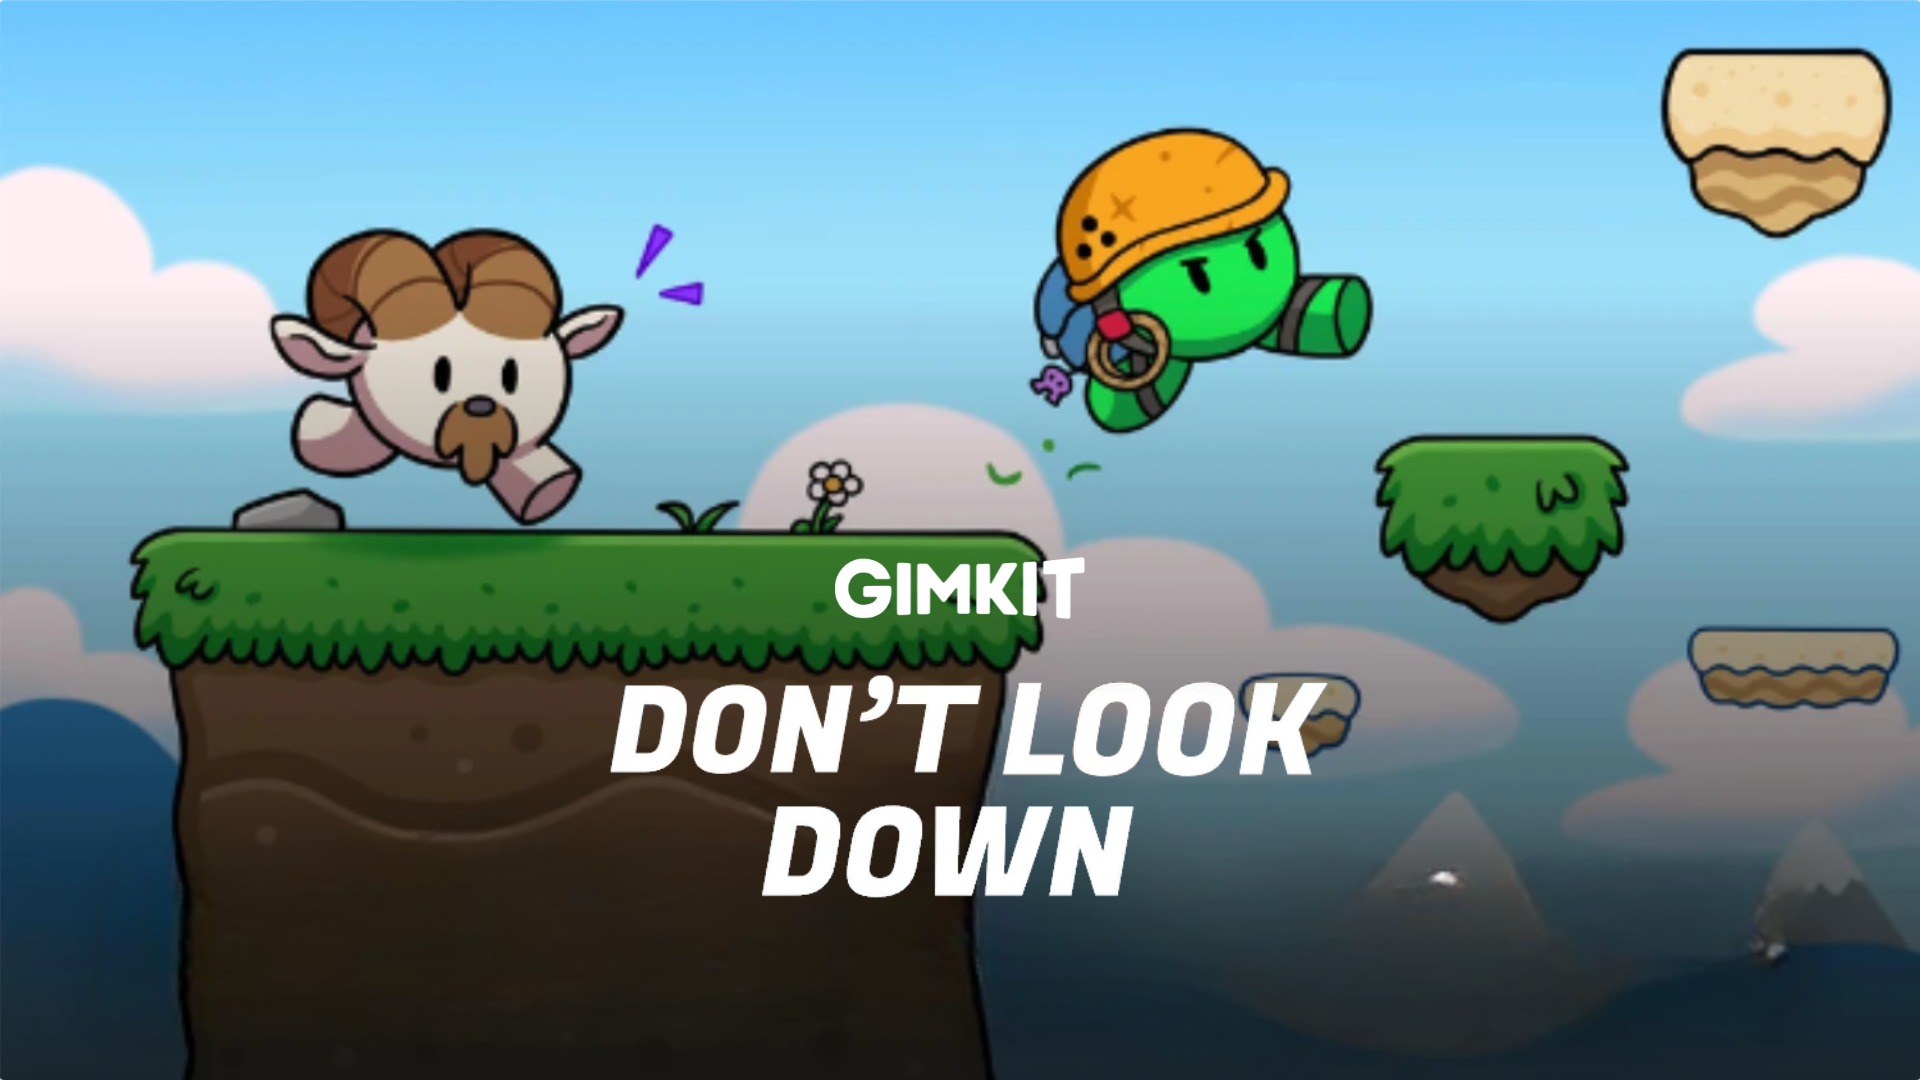 Gimkit: Don’t Look Down